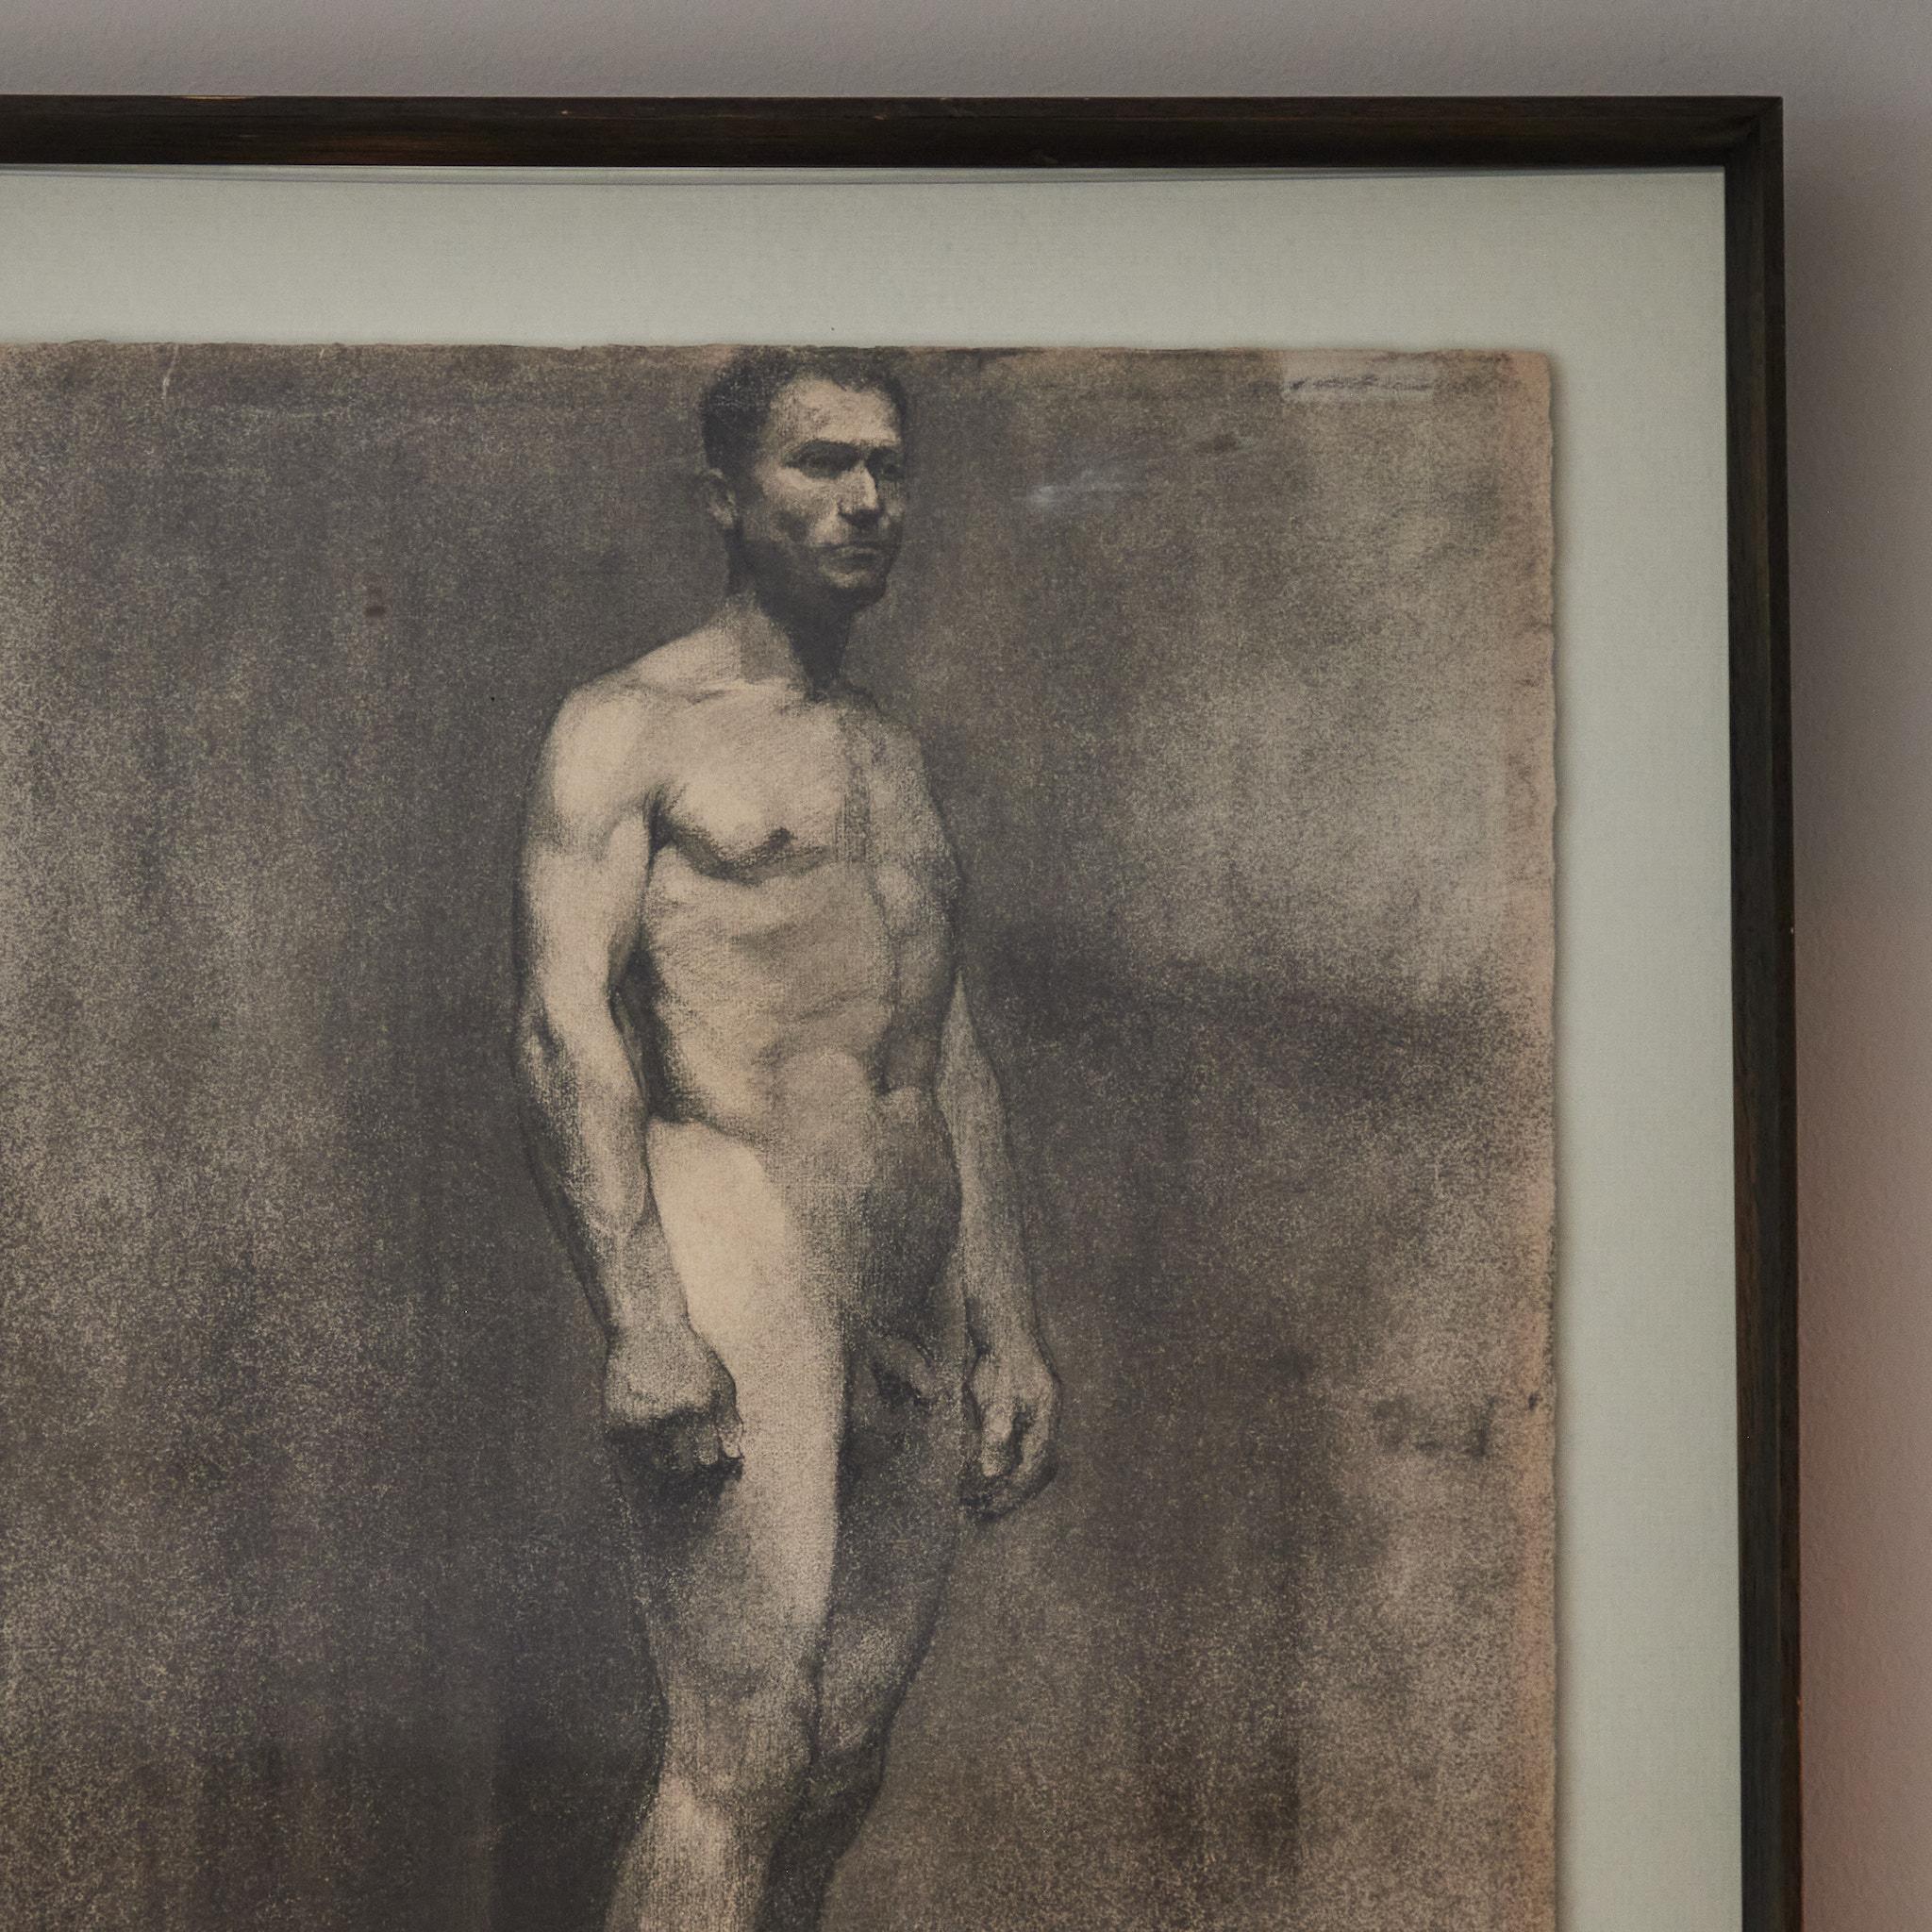 Early 20th-century charcoal drawing of standing nude male model by Florentine portraitist Andrea Landini. Mounted in a custom wood frame, the image has a pensive quality, and a beautiful treatment of light and shadow.

Studying under Riccardo